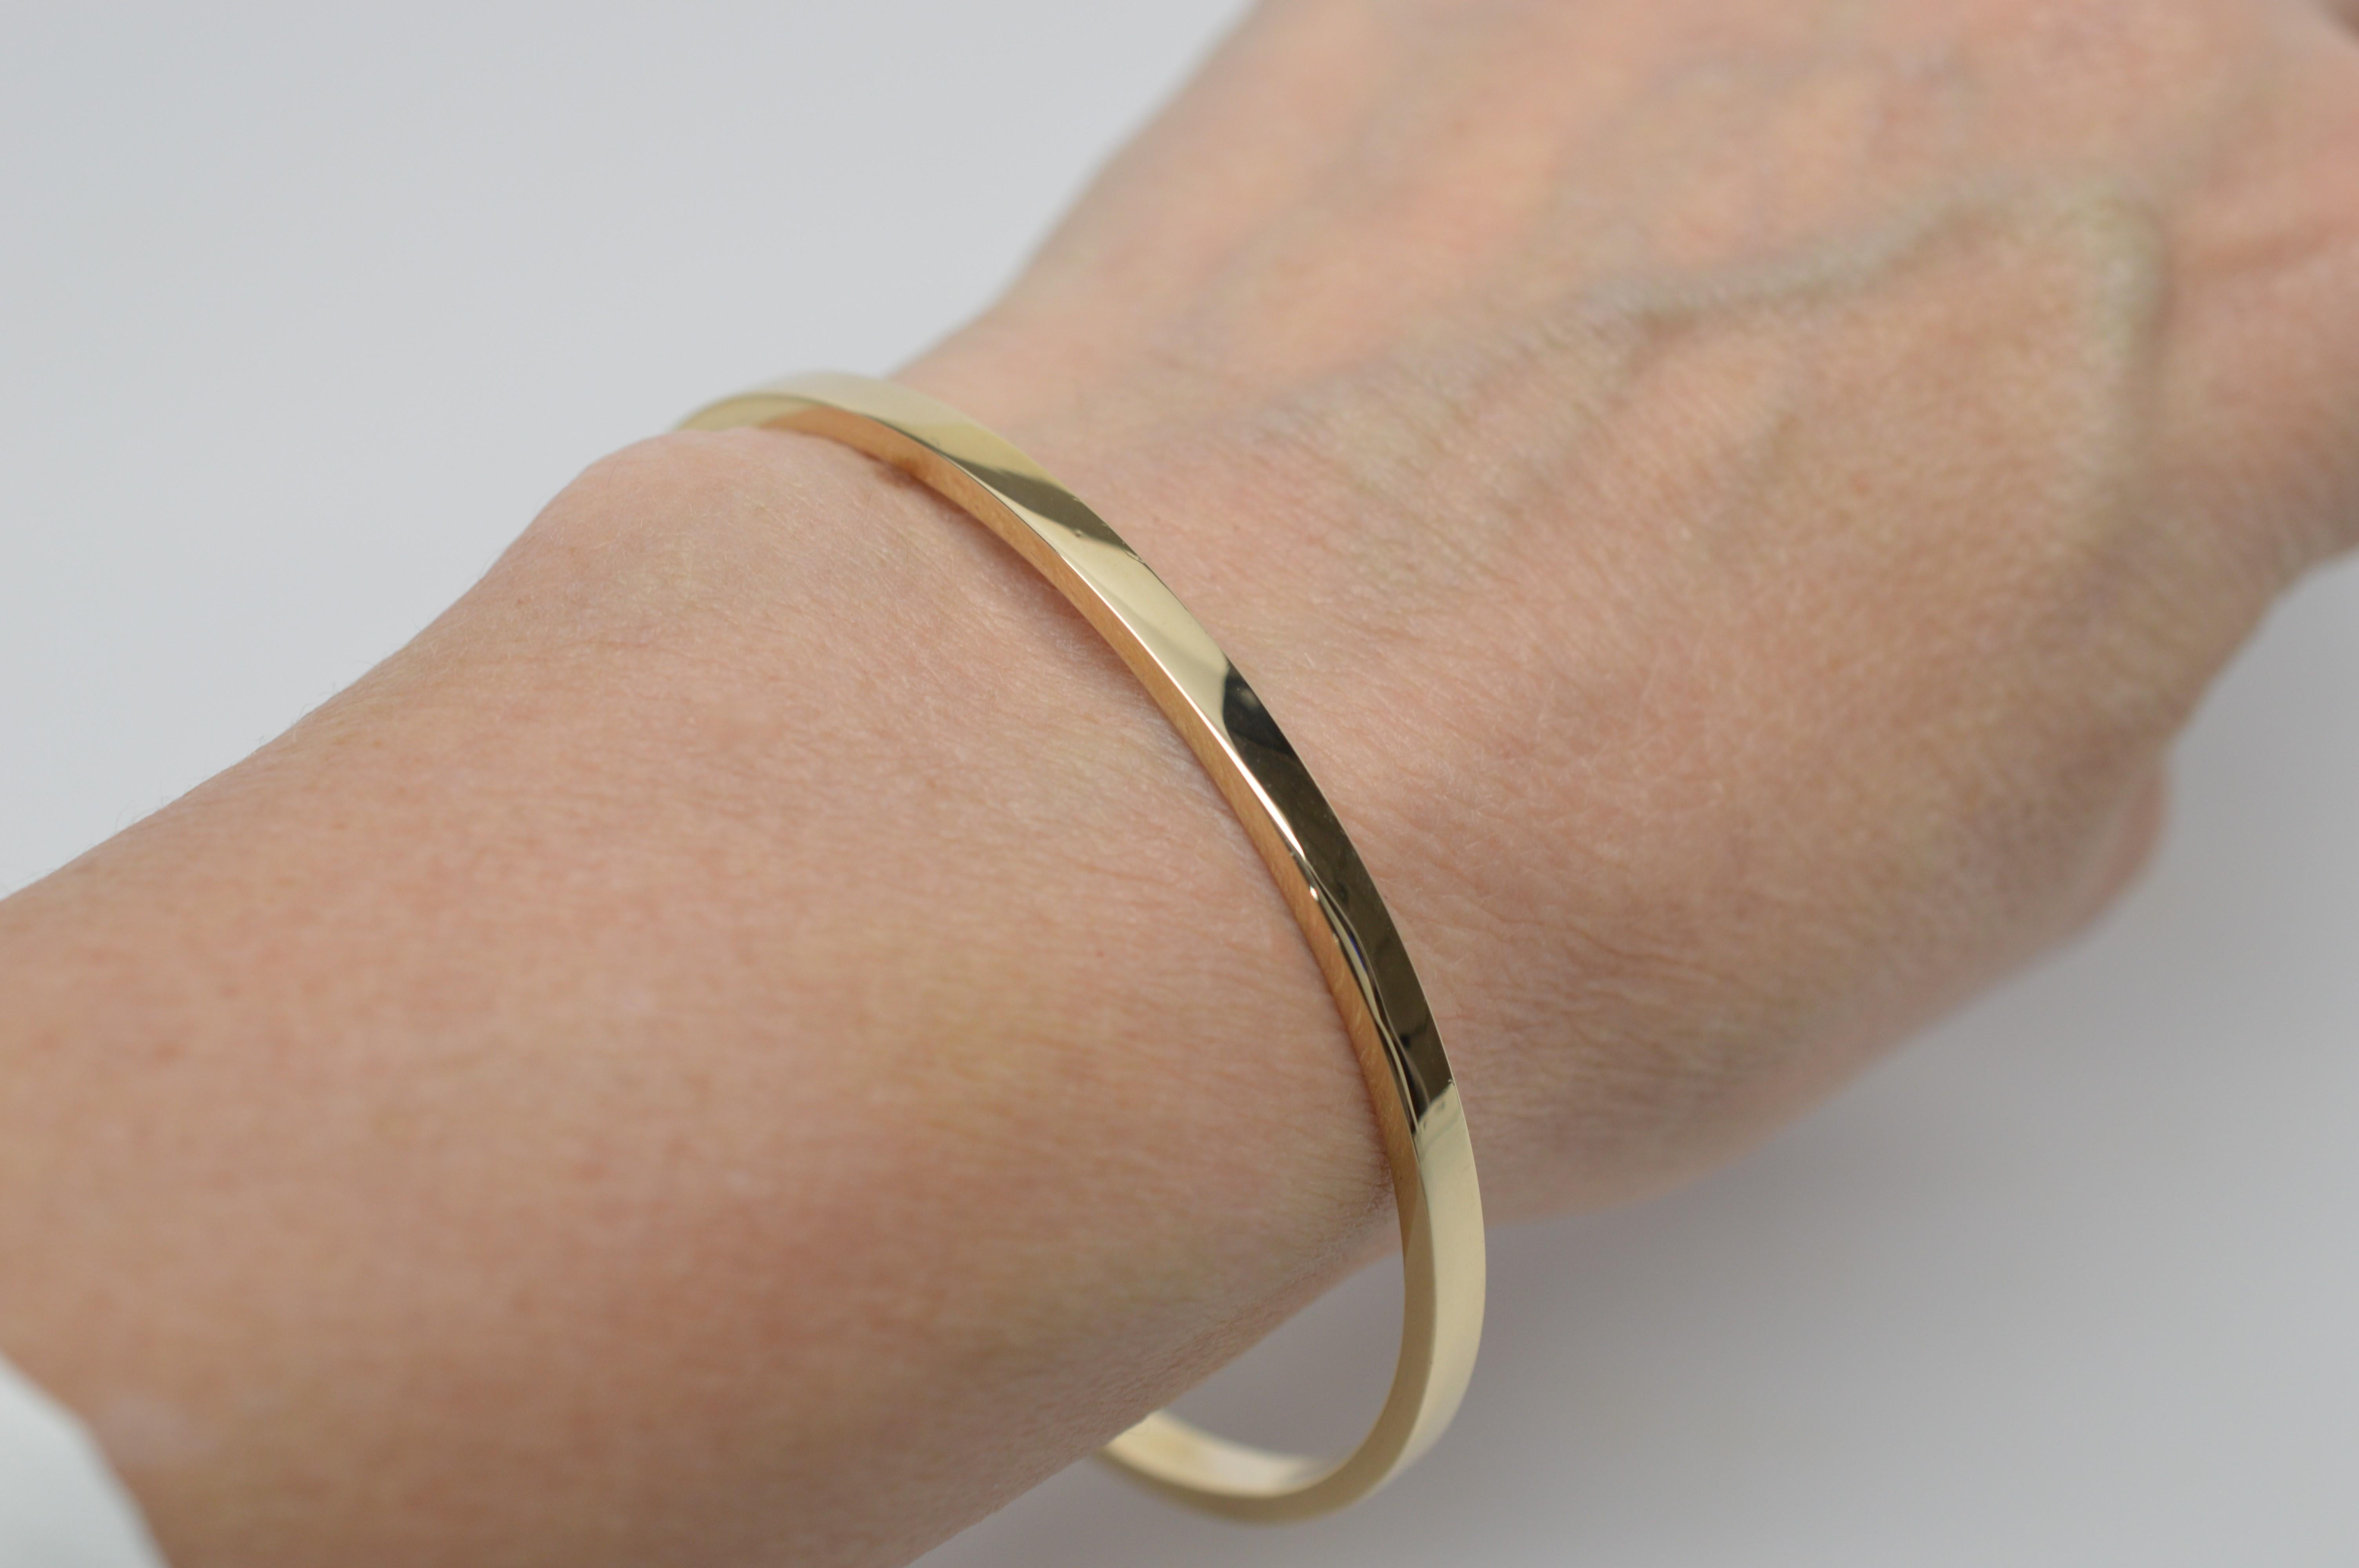 Tiffany signed 14 Karat Yellow Gold Bangle Bracelet. Slim and sleek, measuring 2-3/4 inch diameter and a 7-1/2 inch circumference.
Nearly new with a bright, polished finish. Slide-on style.  From the Estate Collection. In gift box. 